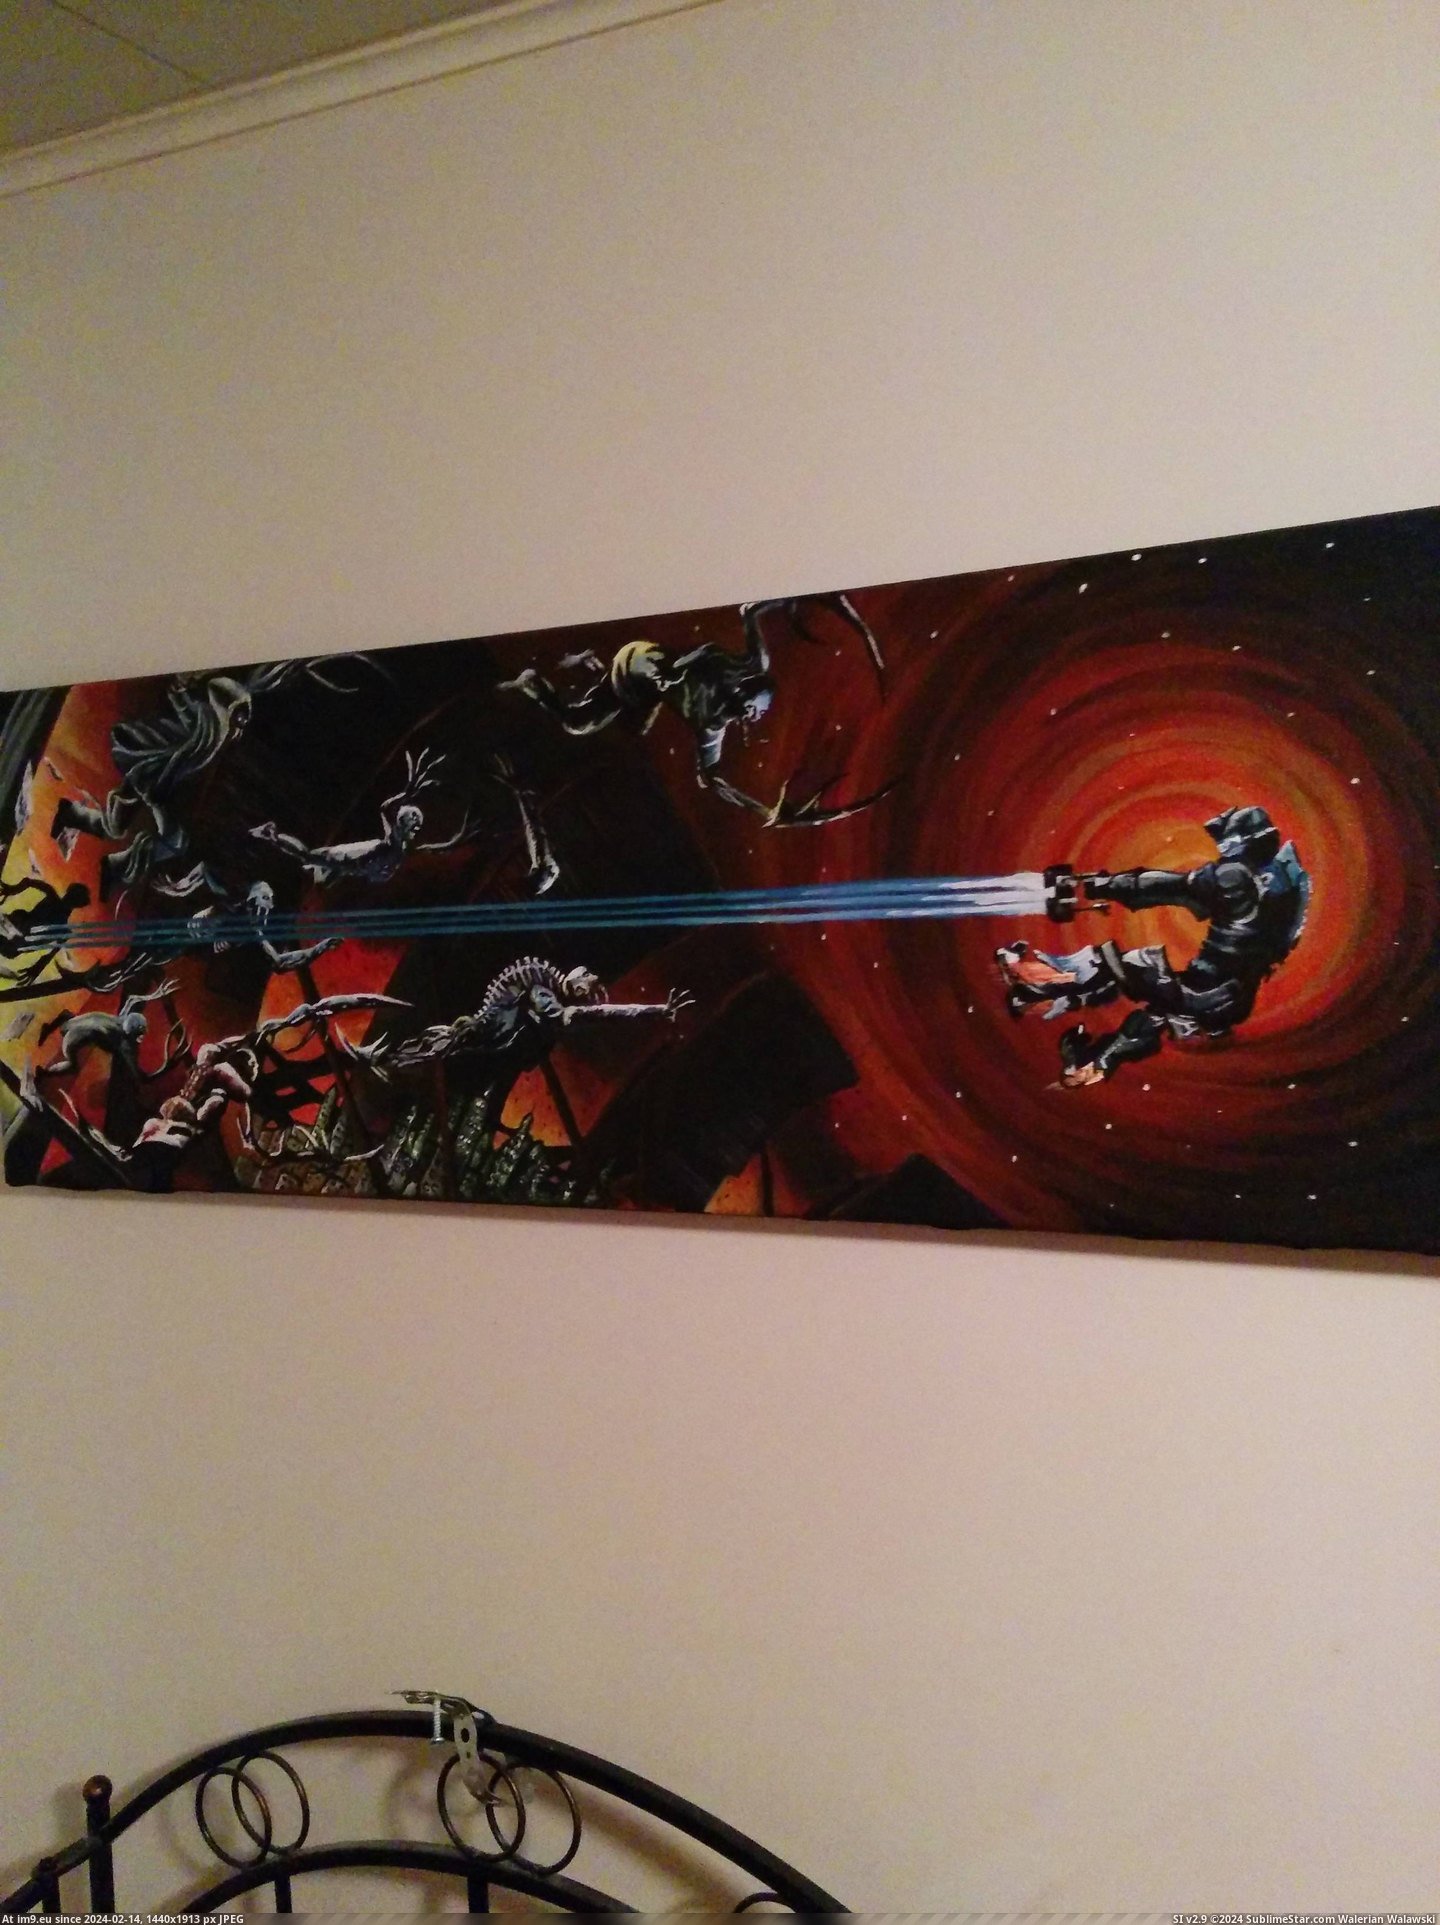 #Gaming #Friend #Space #Dead #Painting #Did [Gaming] A Dead Space painting my friend did for me! 1 Pic. (Изображение из альбом My r/GAMING favs))